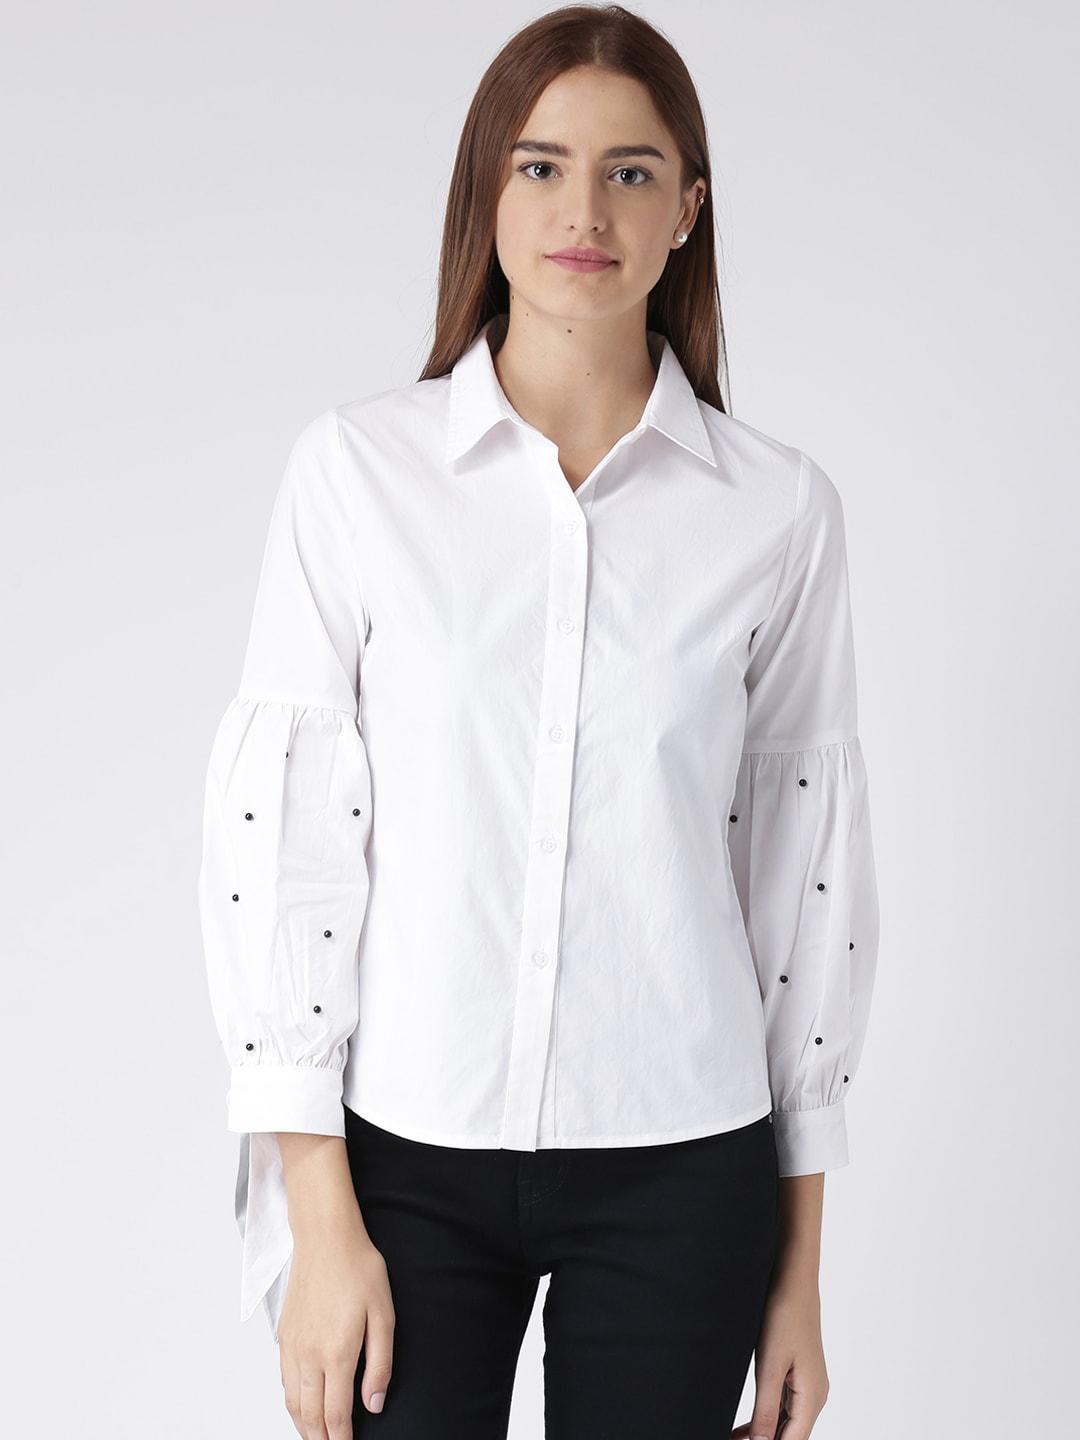 kassually-women-white-comfort-regular-fit-solid-casual-shirt